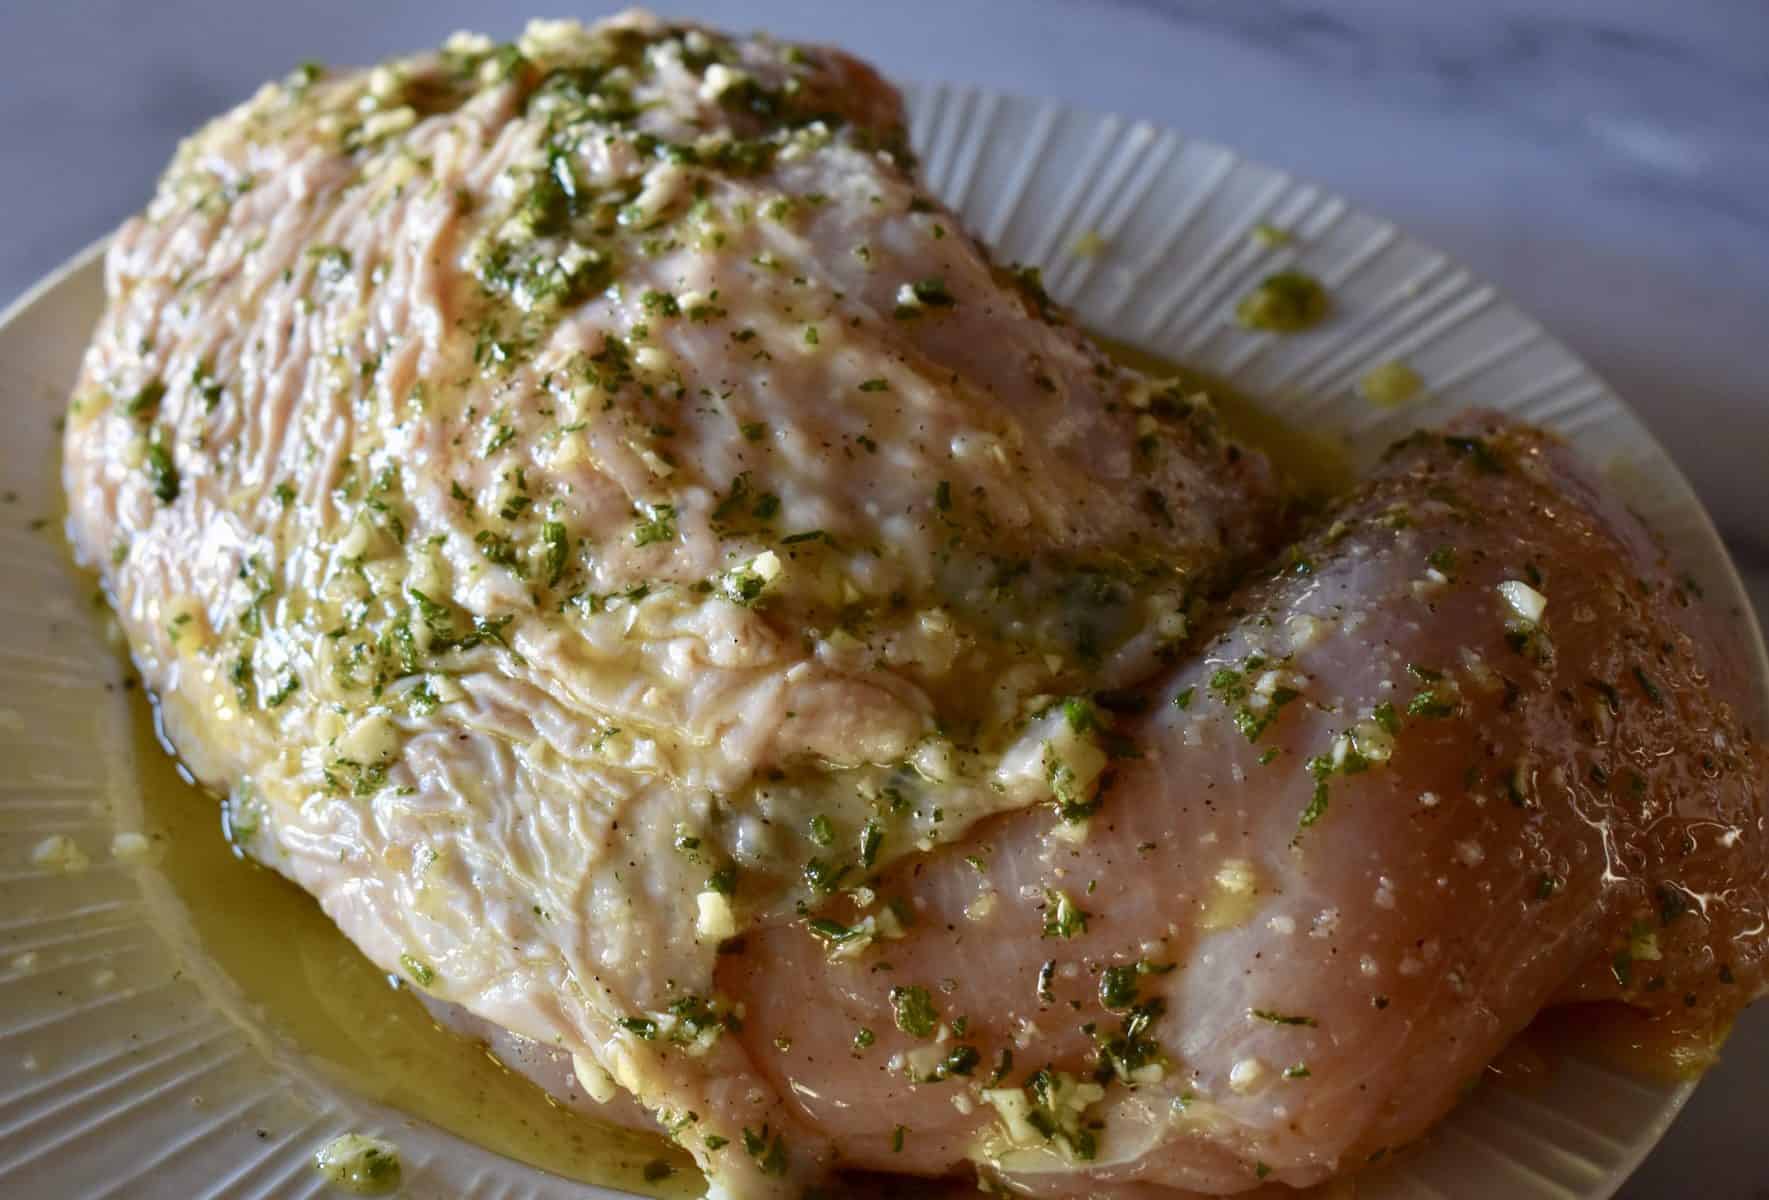 turkey breast rubbed with olive oil flavor mixture. 